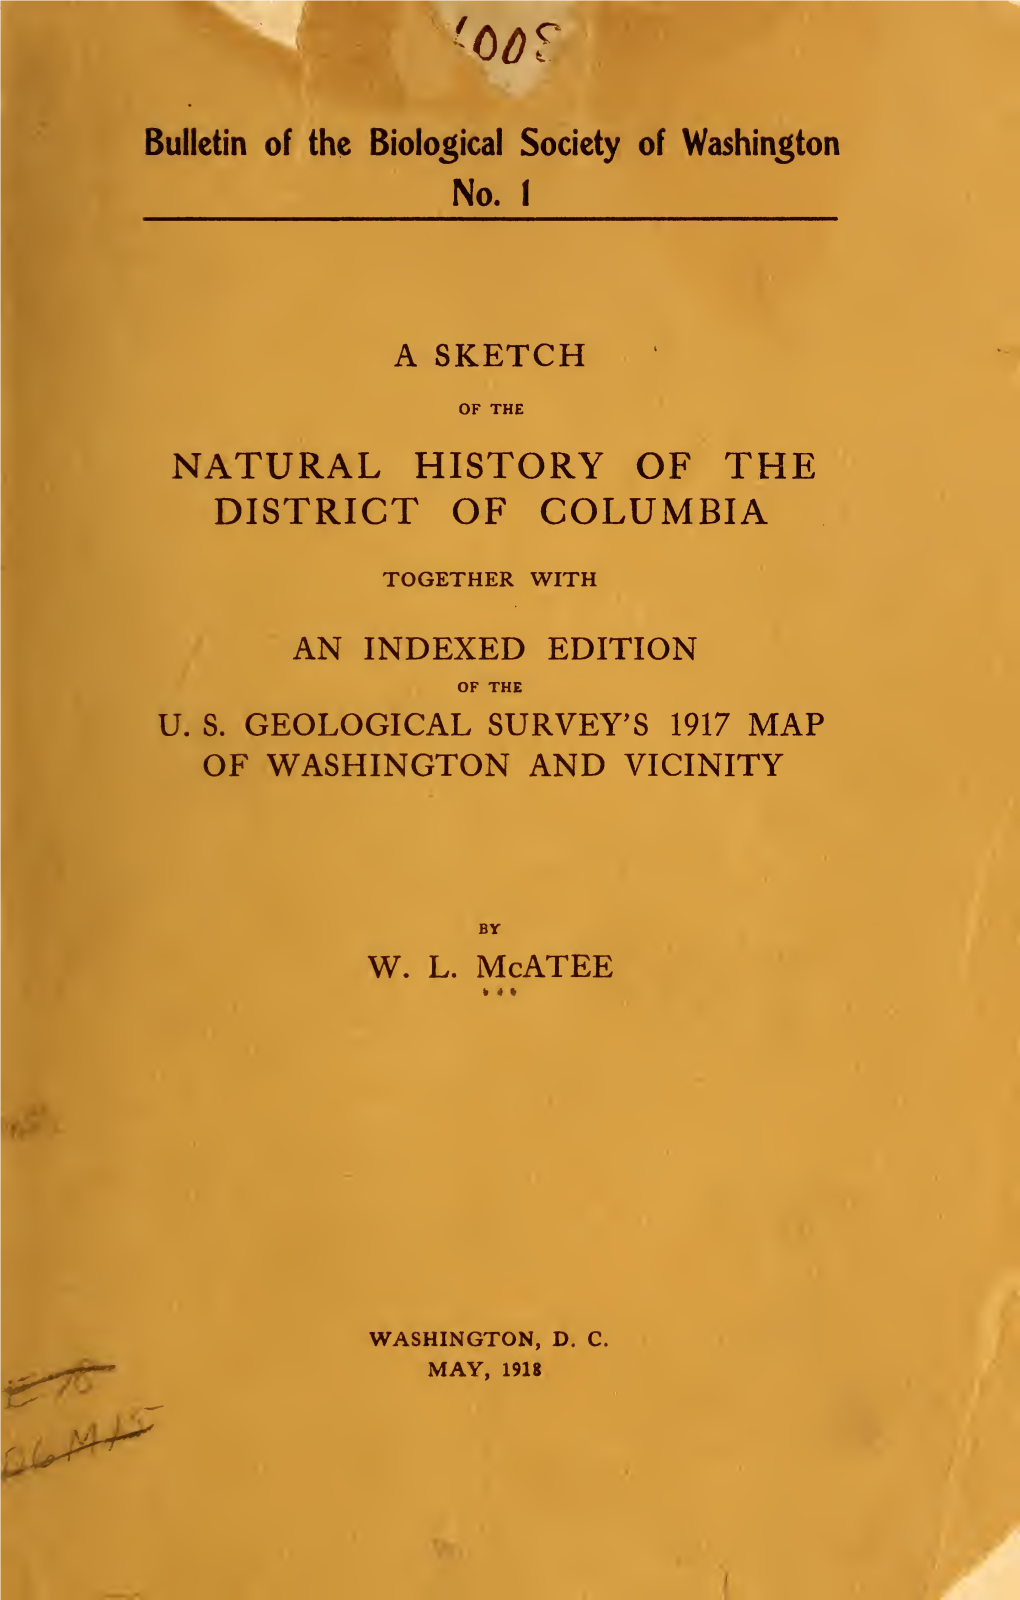 A Sketch of the Natural History of the District of Columbia Together With